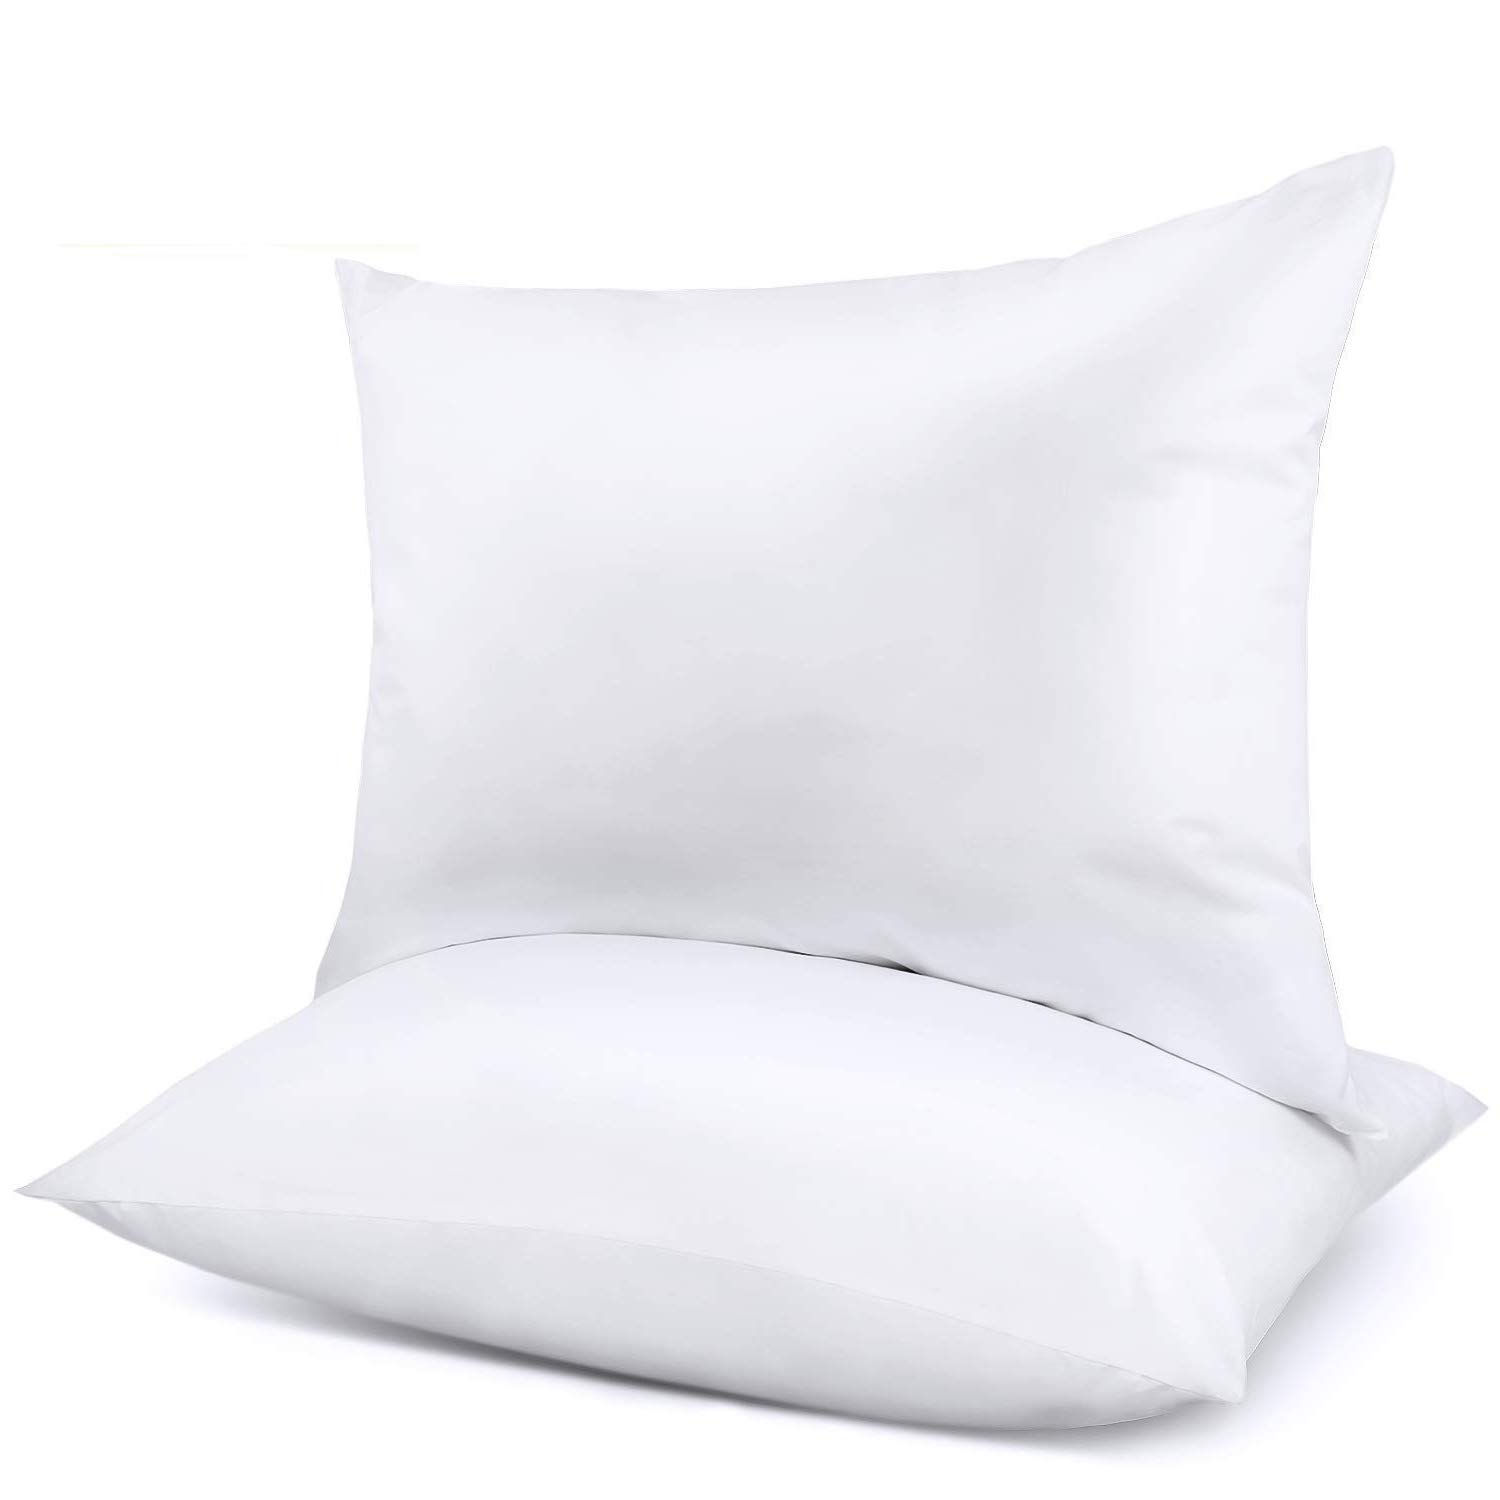 Book Cover Bed Pillows for Sleeping 2 Pack, Pillows for Neck Pain Side Sleepers Premium Pillow Bed Pillows Standard Breathable Cotton Down Alternative Pillow 20 x 26 White